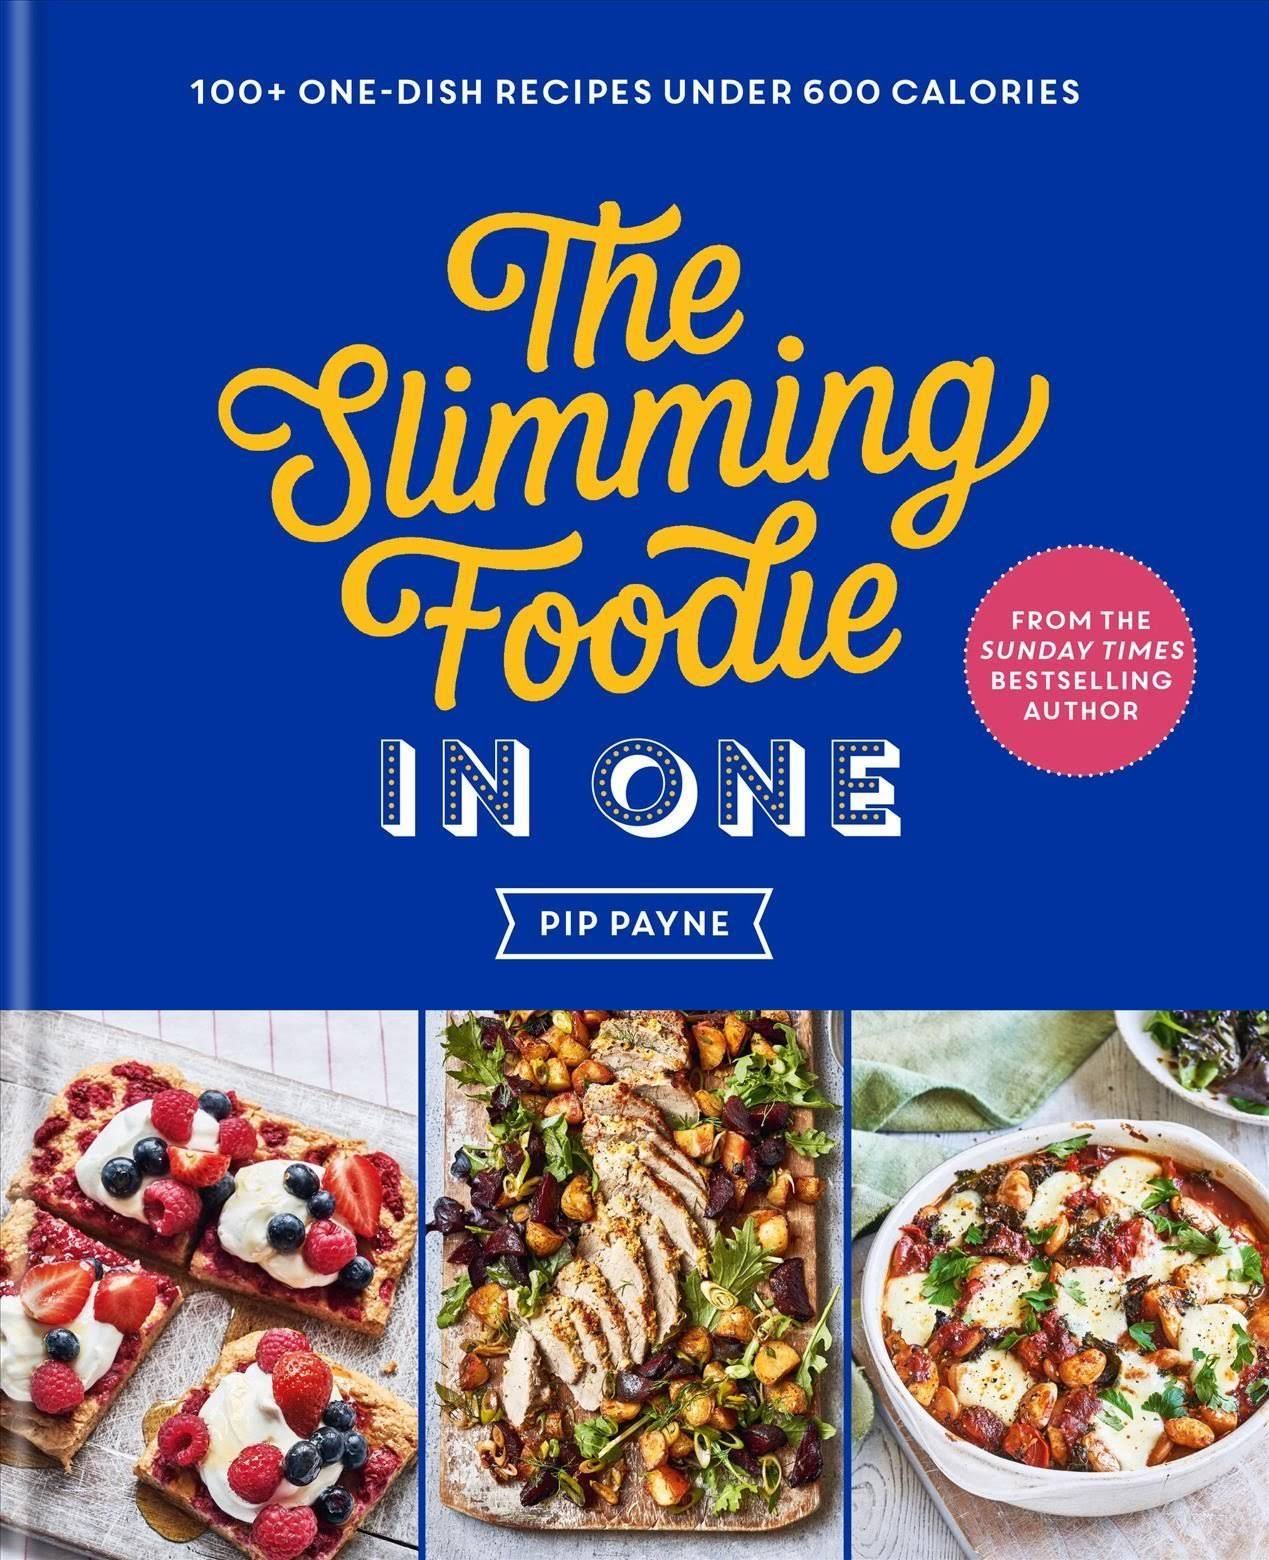 The Slimming Foodie in One: 100+ One-Dish Recipes Under 600 Calories [Book]